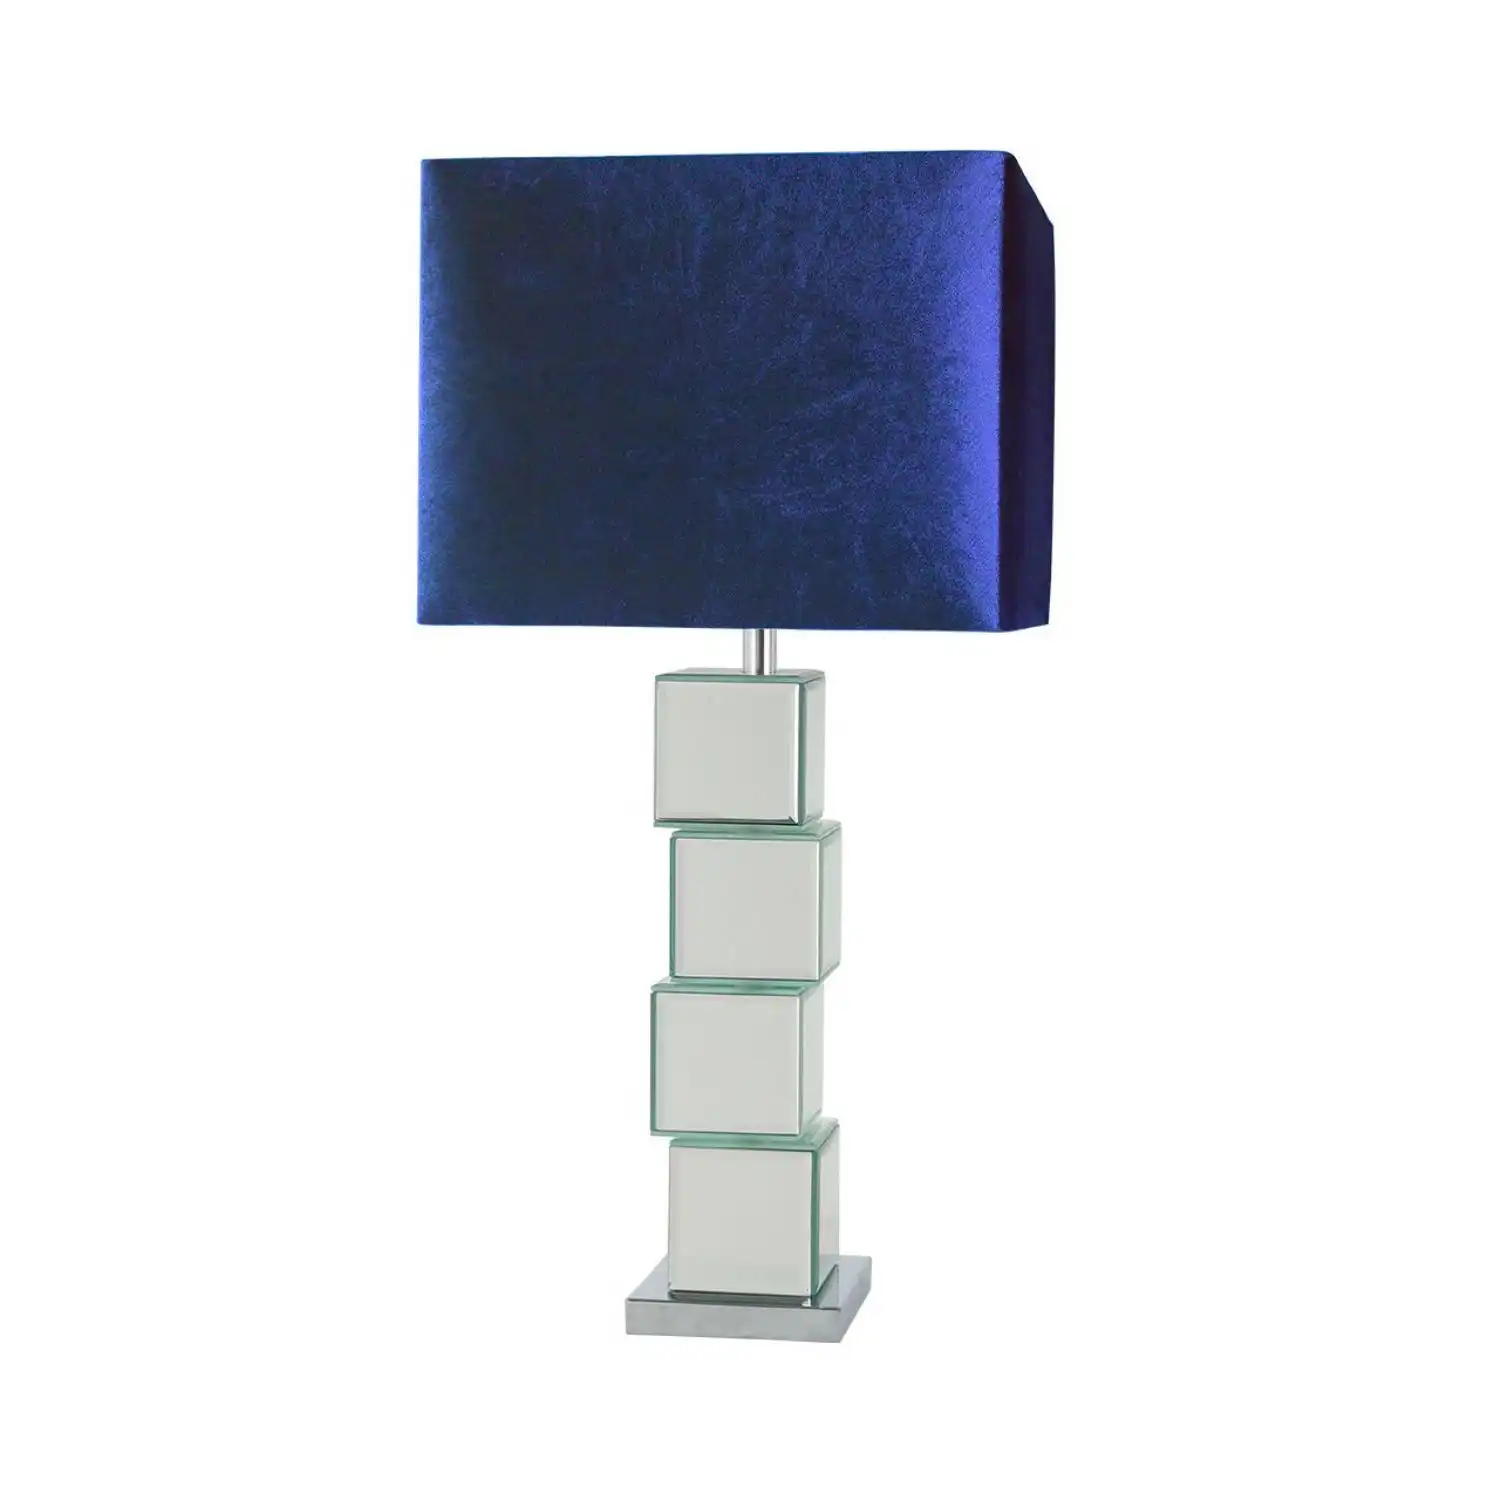 Block Design Mirror Table Lamp with Blue Shade